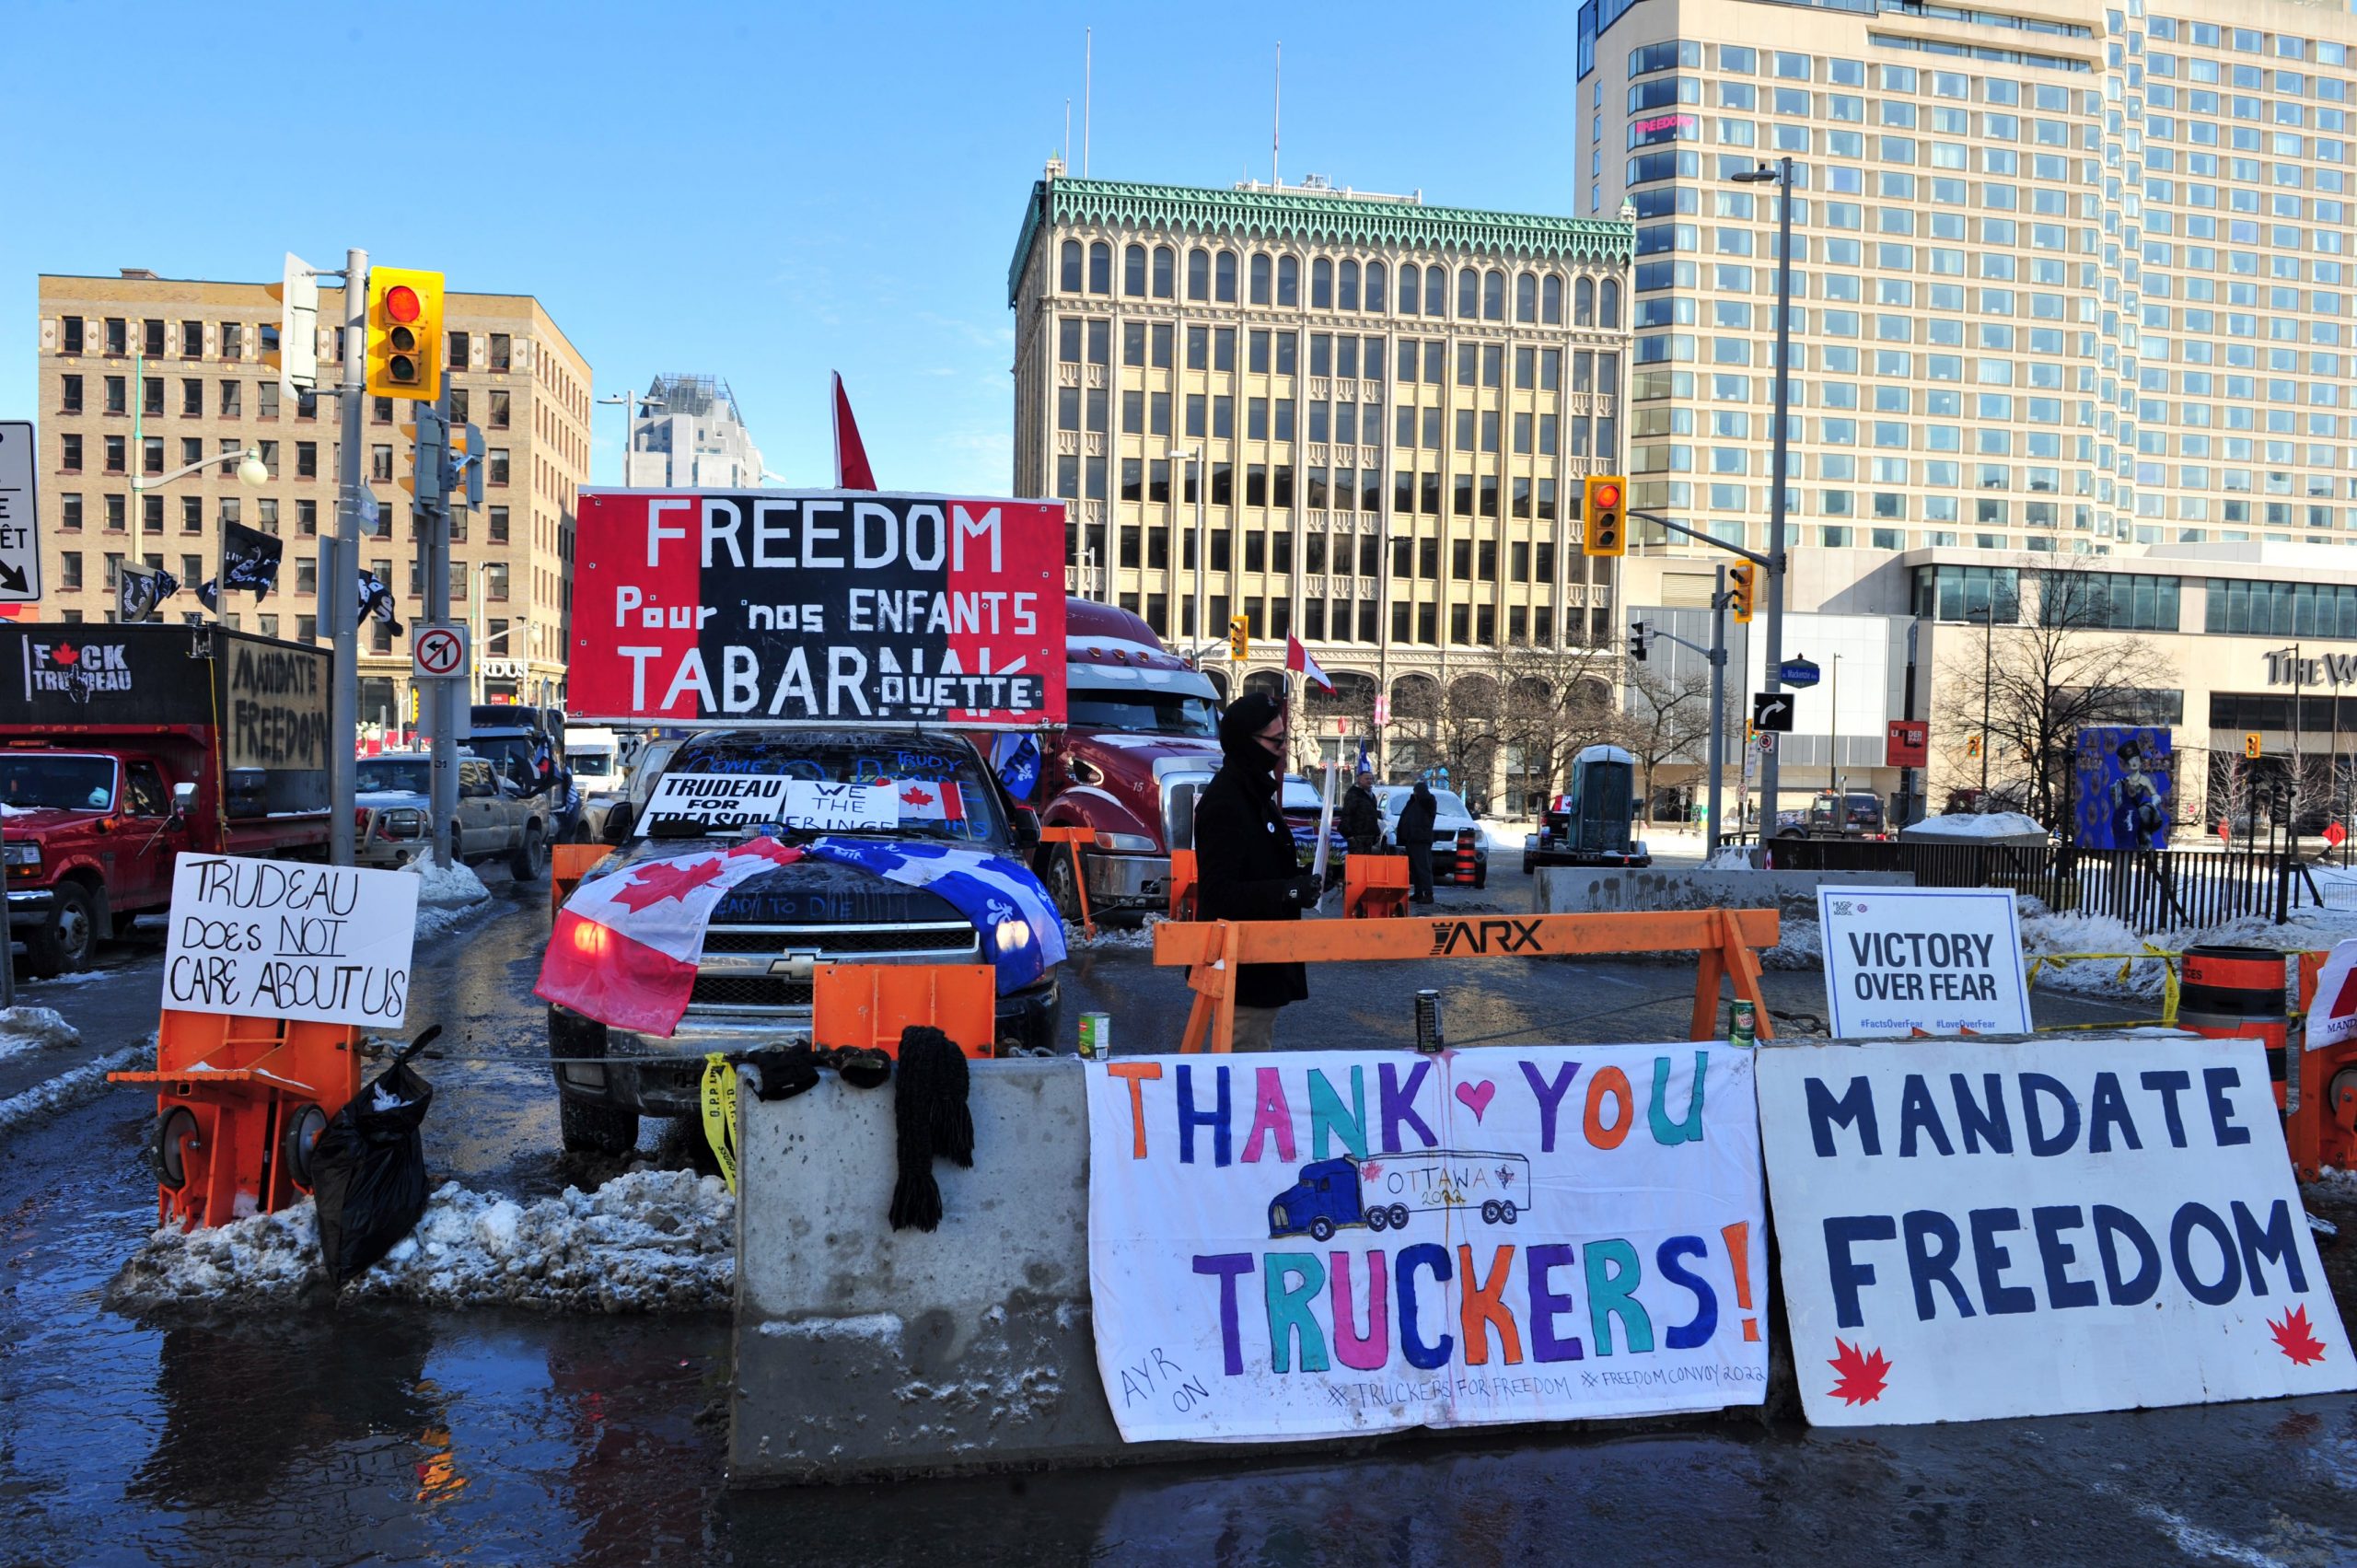 Protesters of the Freedom convoy gather near the parliament hill as truckers continue to protest in Ottawa, Canada on February 7, 2022.